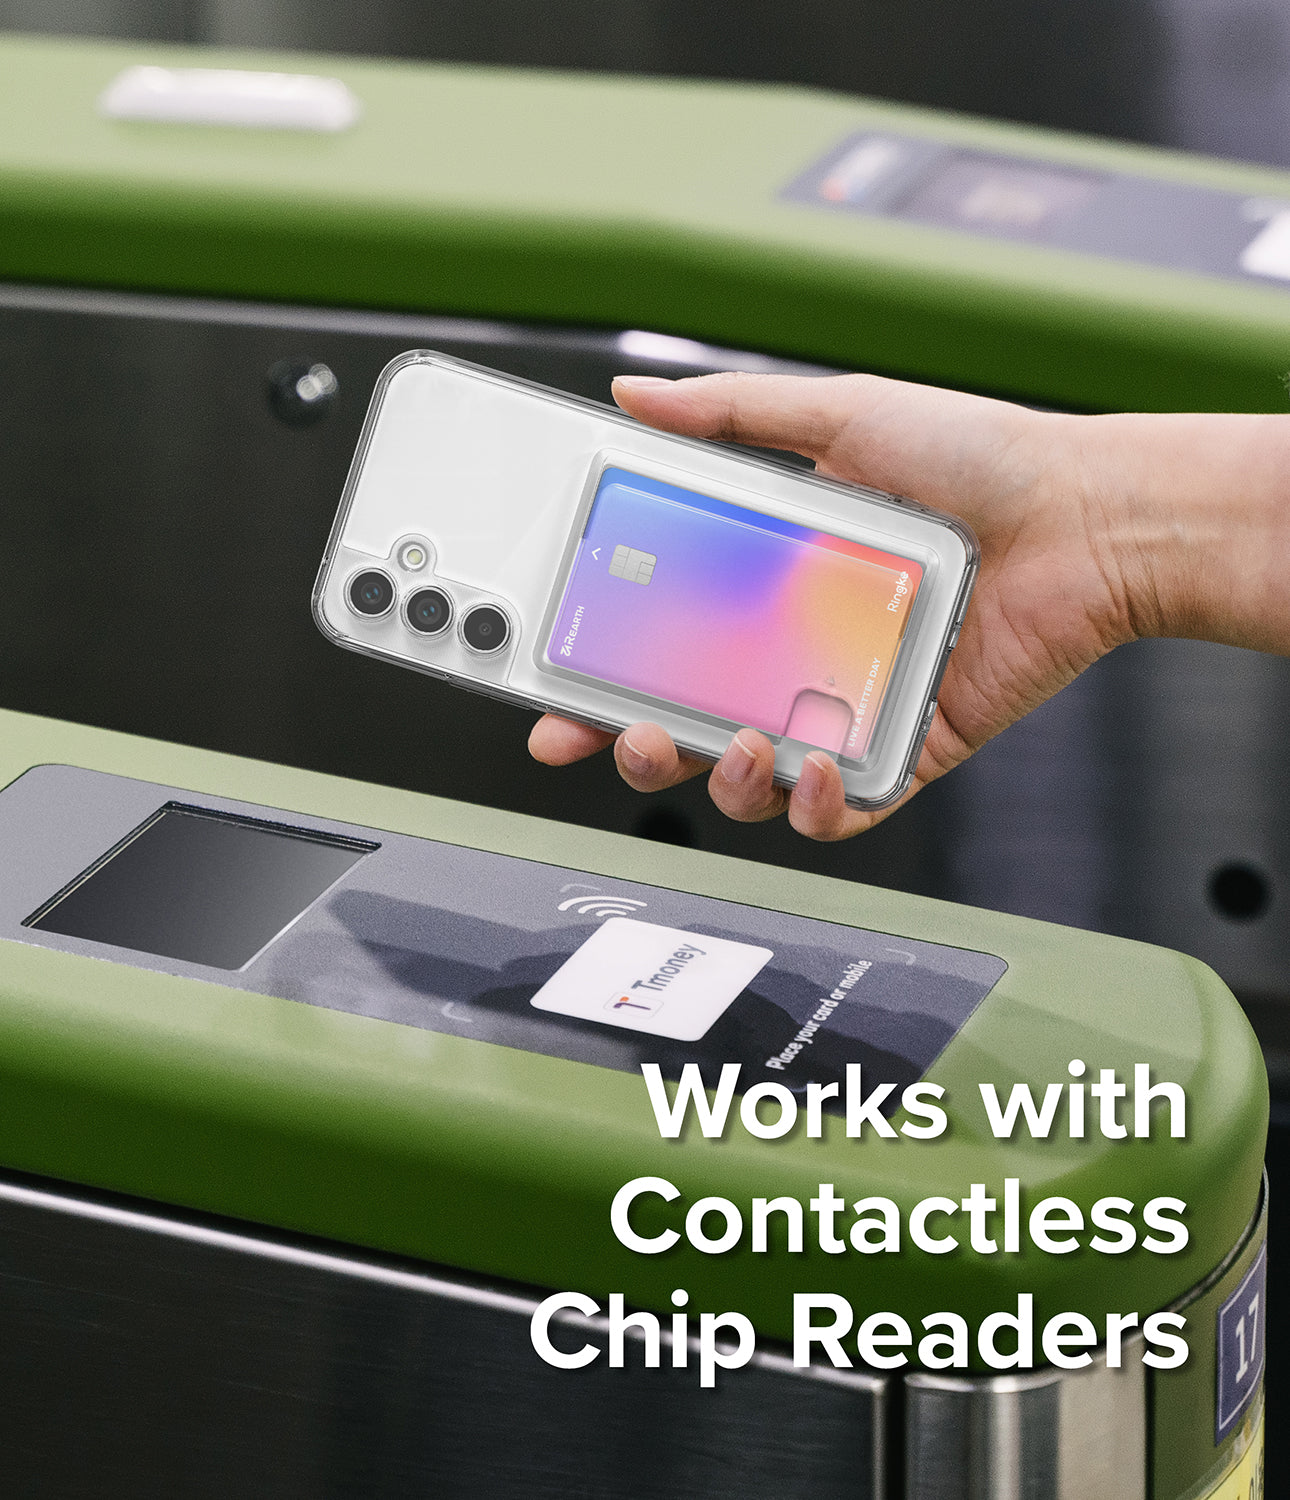 Works with contactless chip readers